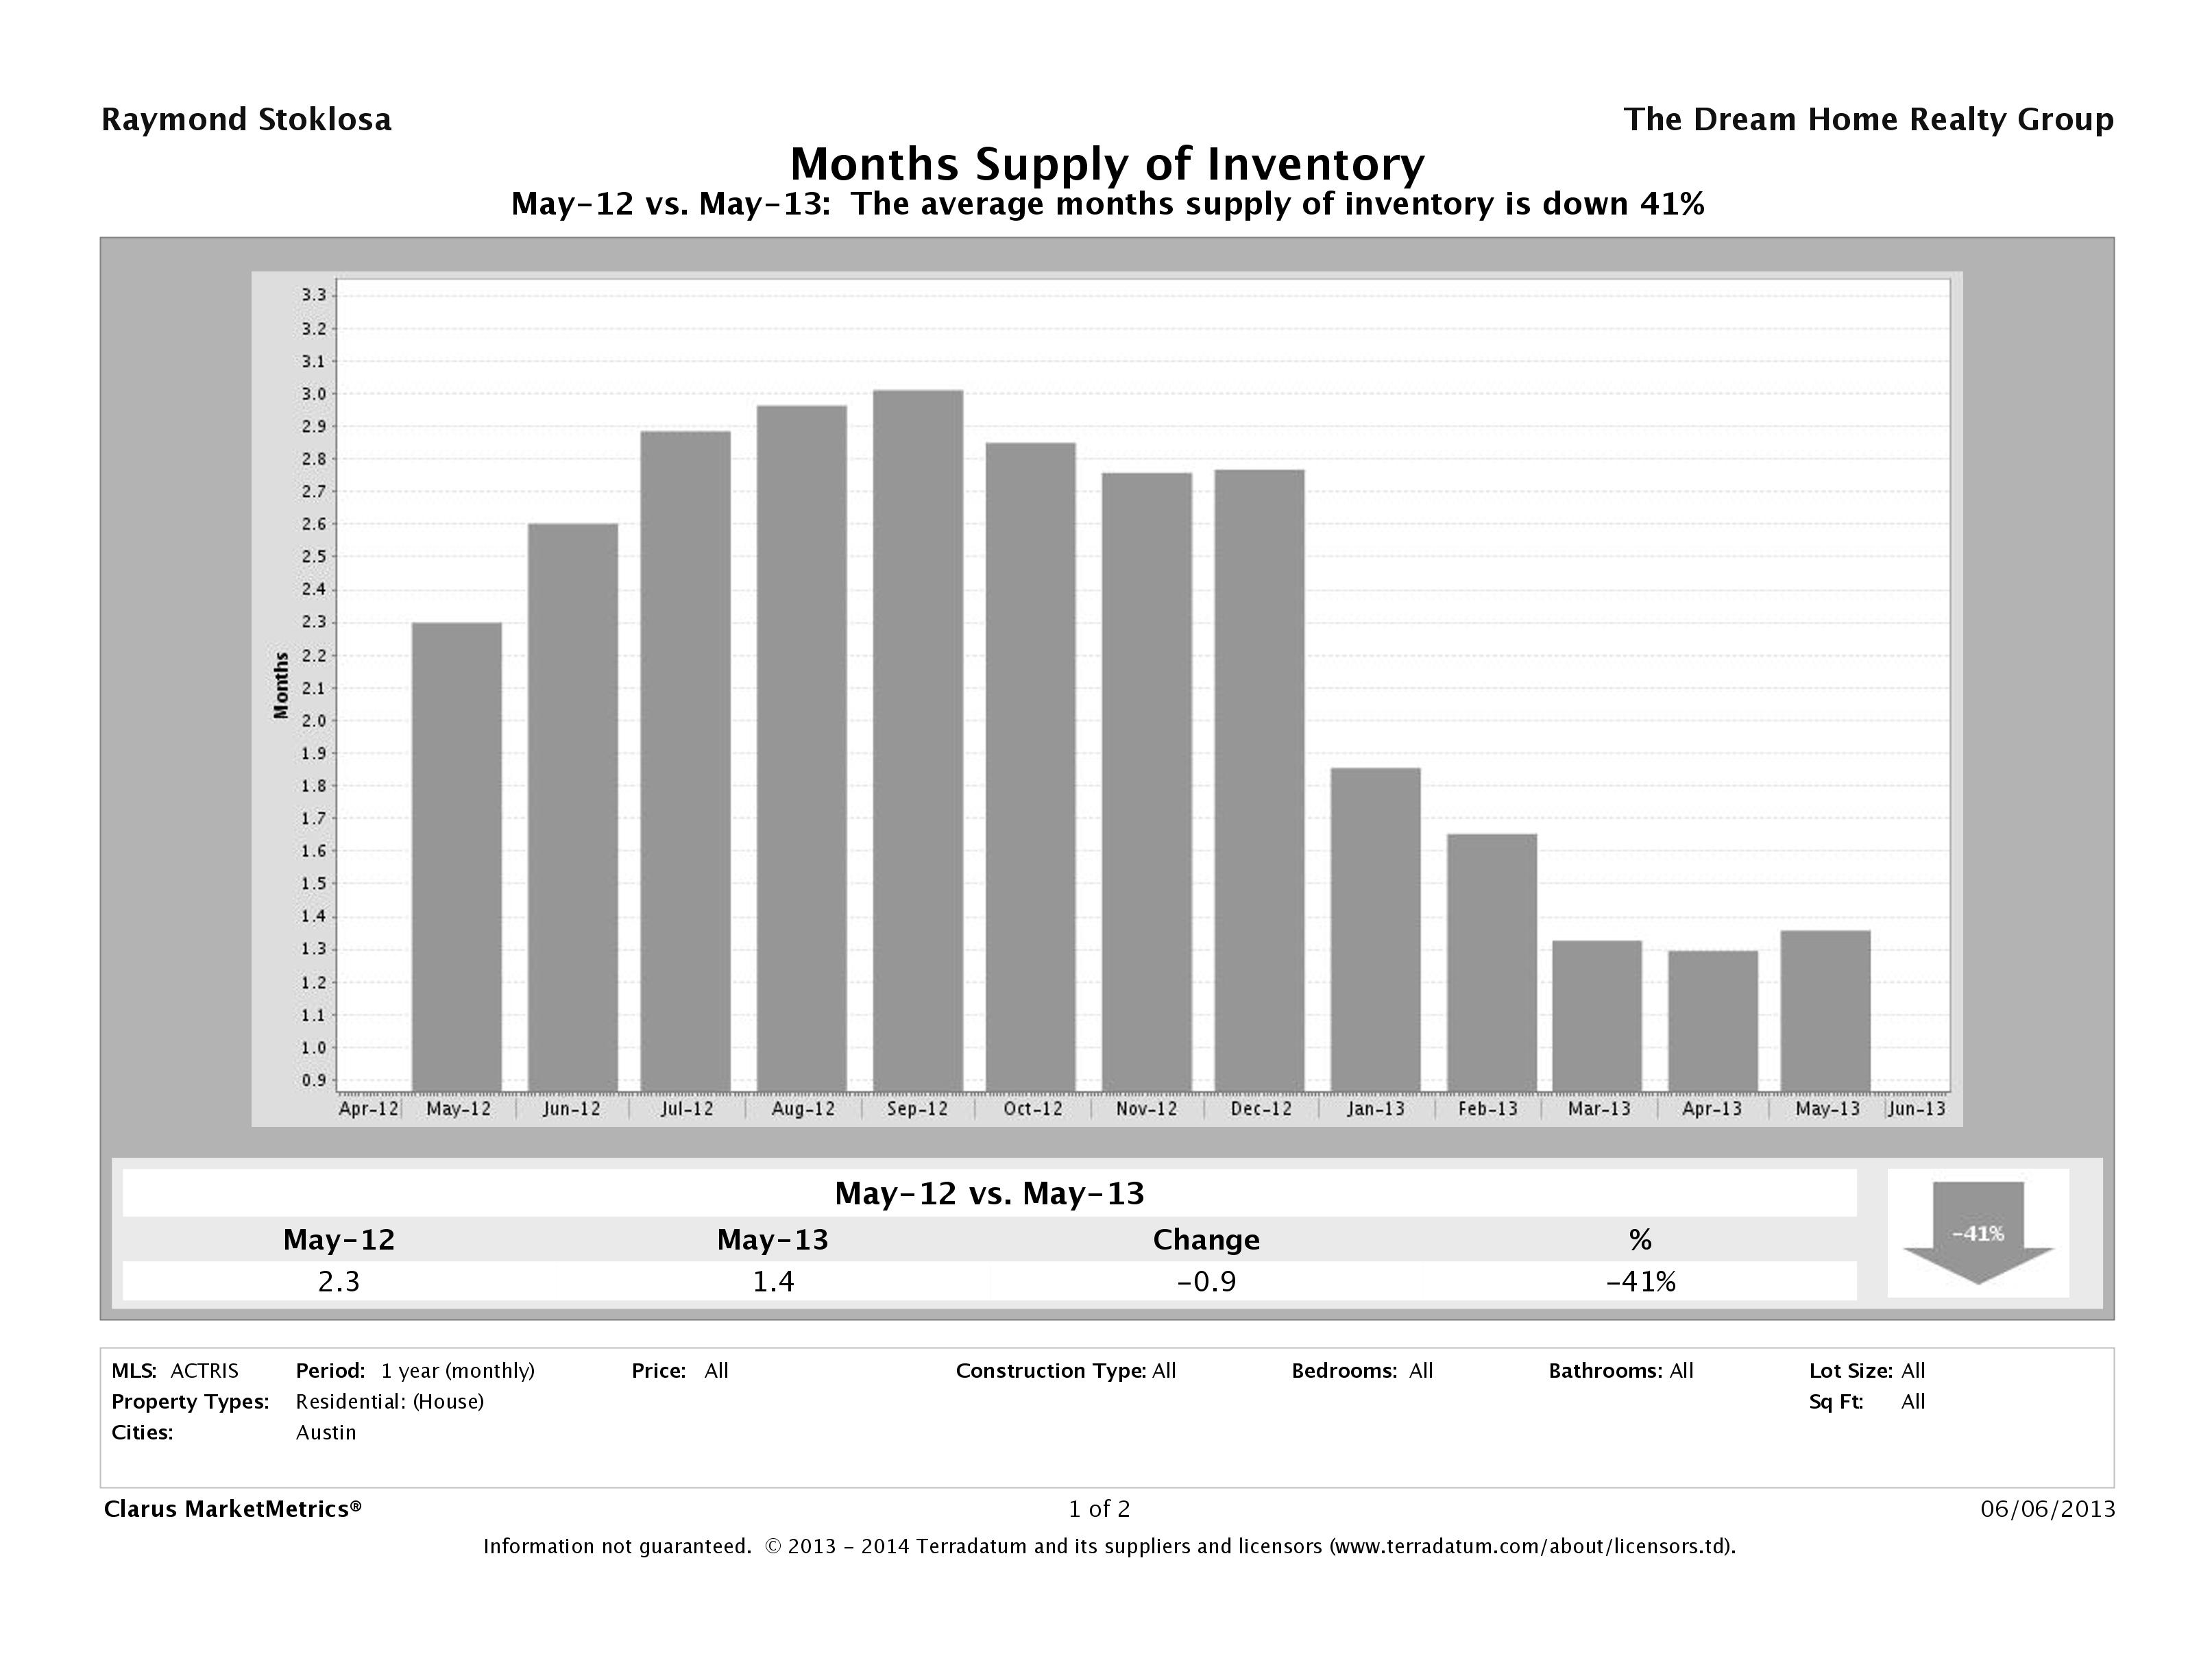 Austin single family home months inventory May 2013